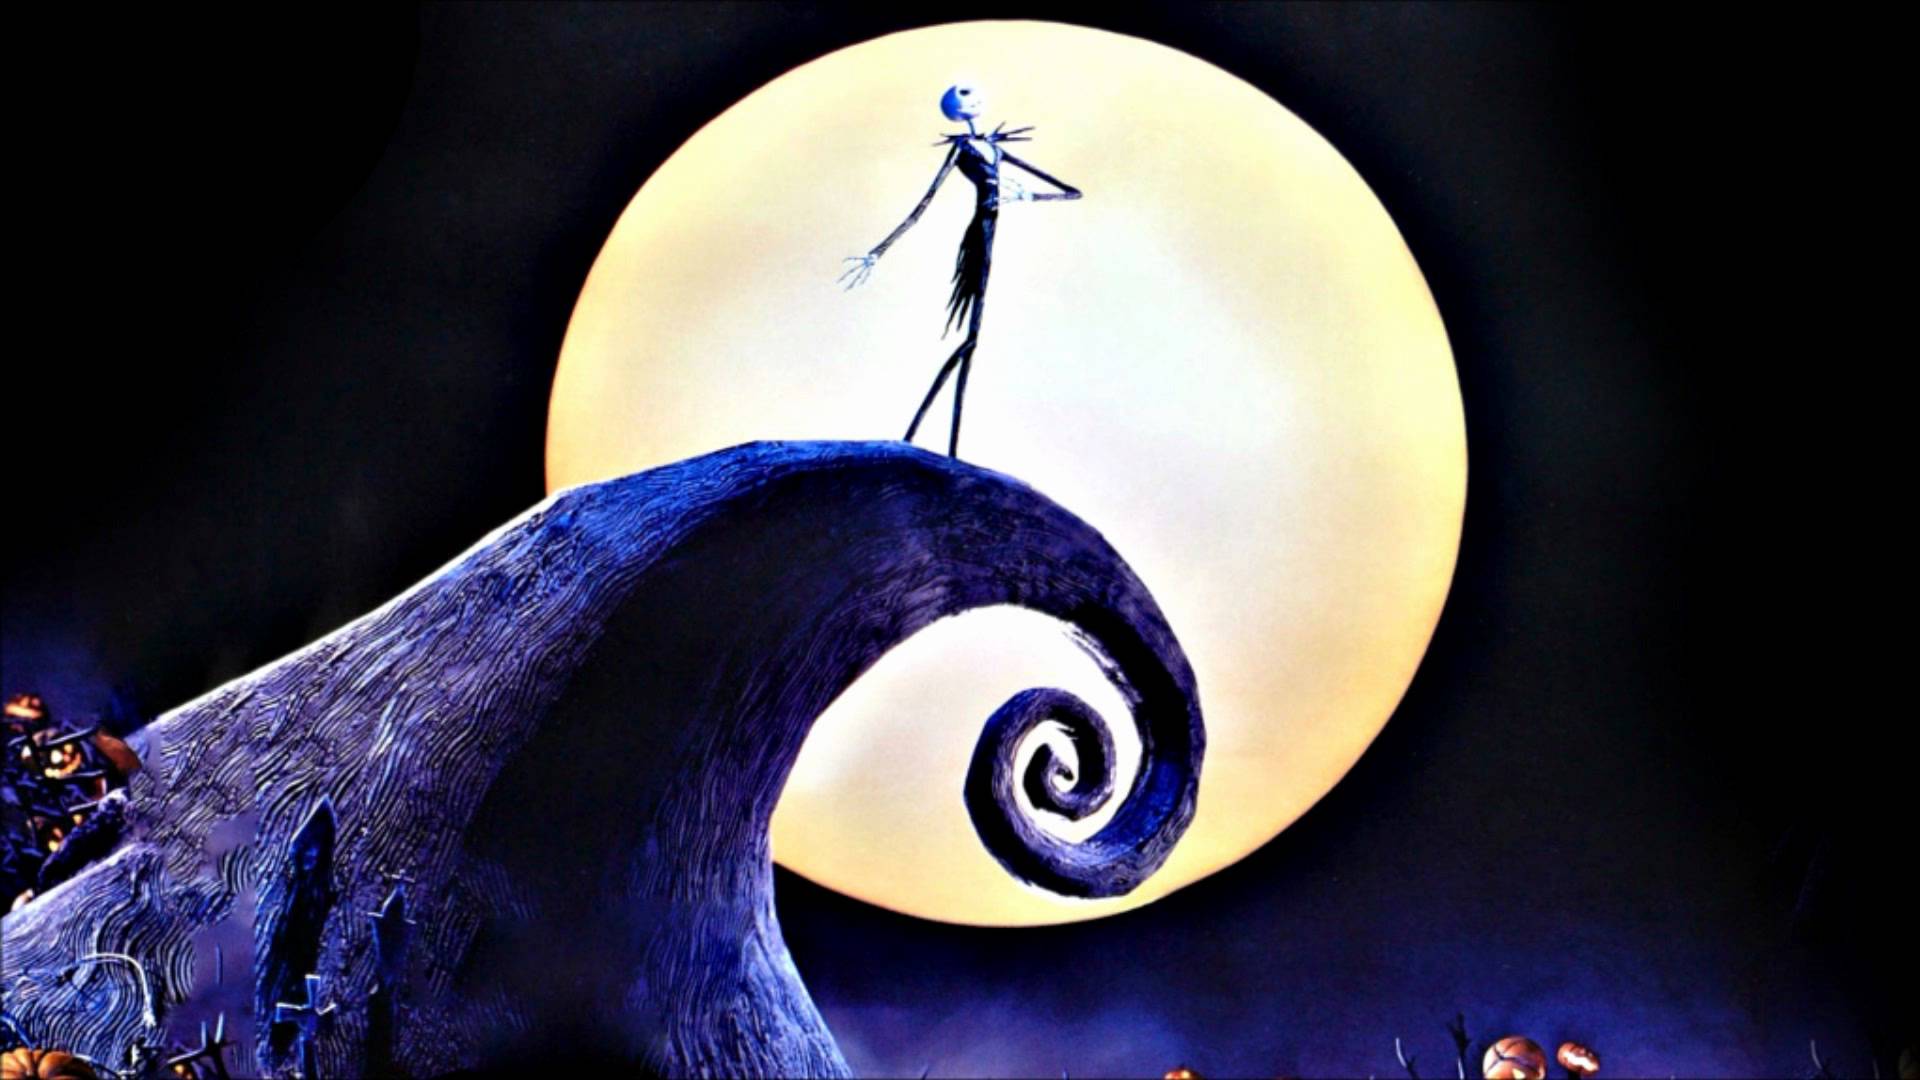 Wallpaper For Nightmare Before Christmas Jack And Sally Desktop